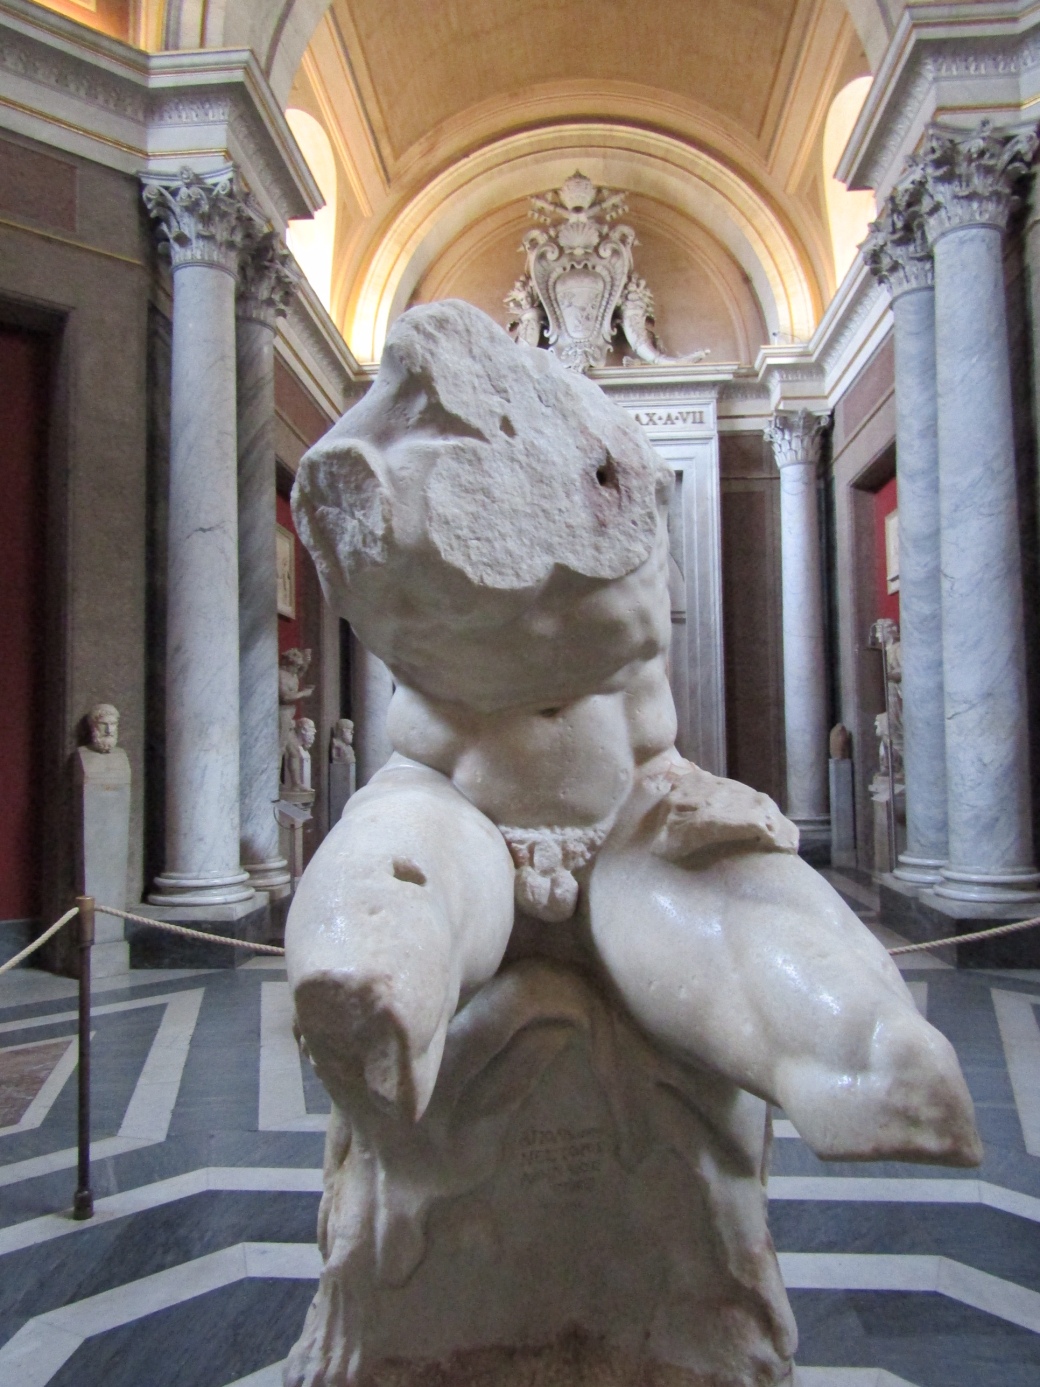 The Belvedere Torso is one of the most important pieces in the Vatican collection. While the artist who carved it around 1 A.D. is relatively unknown, the piece had a huge influence on 16th century artists, in particular Michelangelo, who patterned the figures of many of the frescos in the Sistine Chapel off the sculpture.